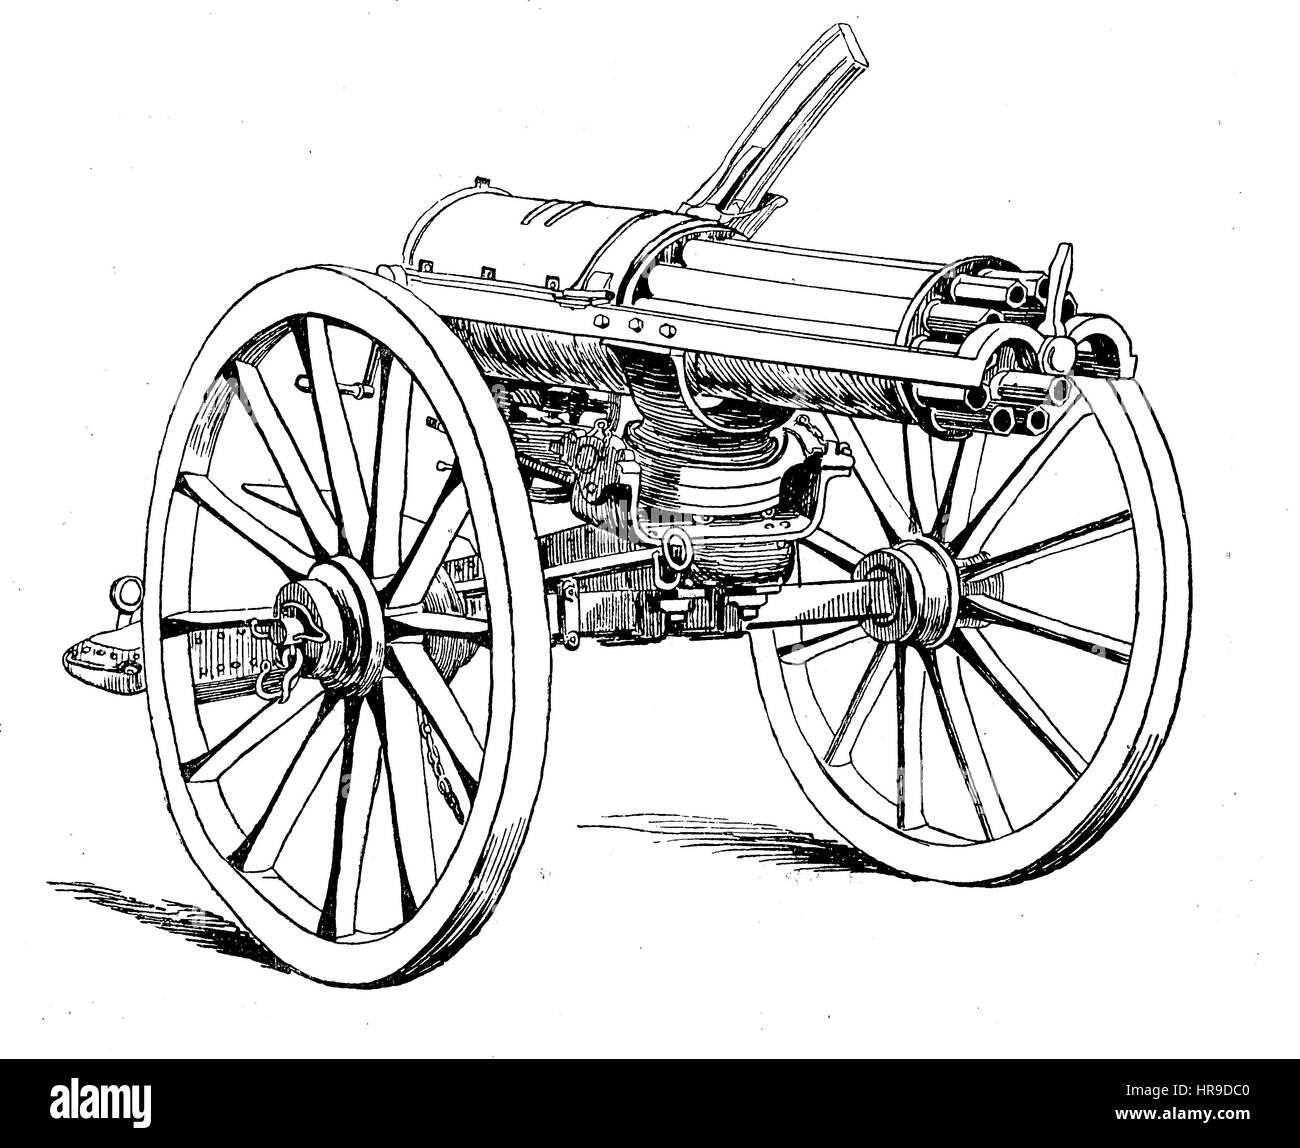 A mitrailleuse, grapeshot is a type of volley gun with multiple barrels of rifle calibre that can fire either multiple rounds at once or several rounds in rapid succession, The Gatling gun is one of the best-known early rapid-fire spring loaded, hand cranked weapons and a forerunner of the modern machine gun, Situation from the time of The Franco-Prussian War or Franco-German War,  Deutsch-Franzoesischer Krieg, 1870-1871, Reproduction of an original woodcut from the year 1885, digital improved Stock Photo